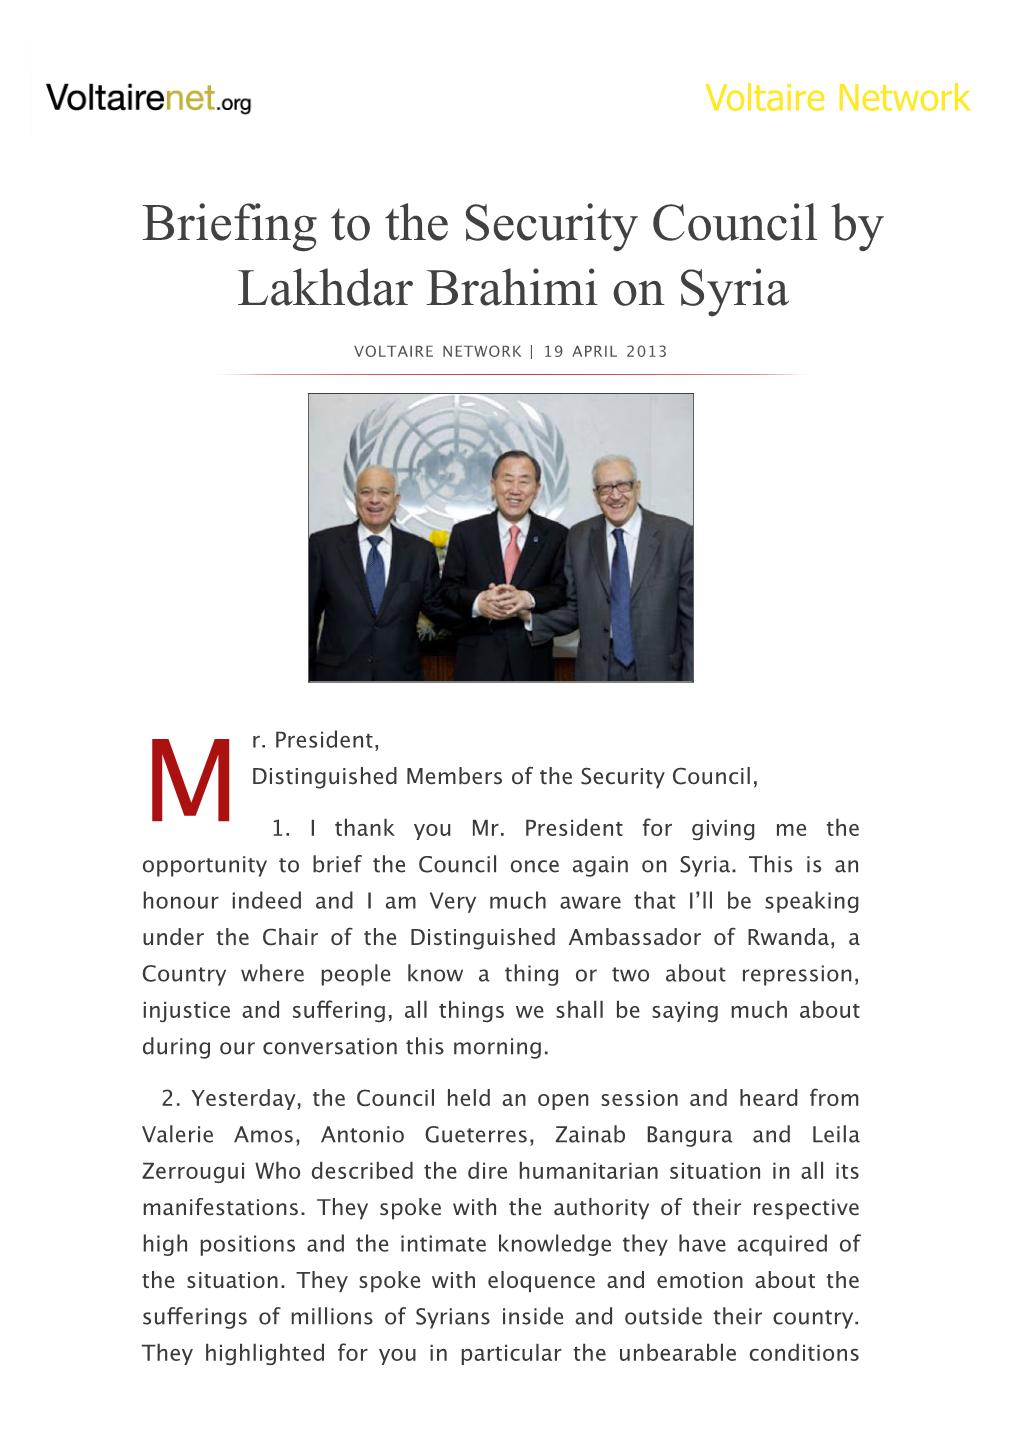 Briefing to the Security Council by Lakhdar Brahimi on Syria